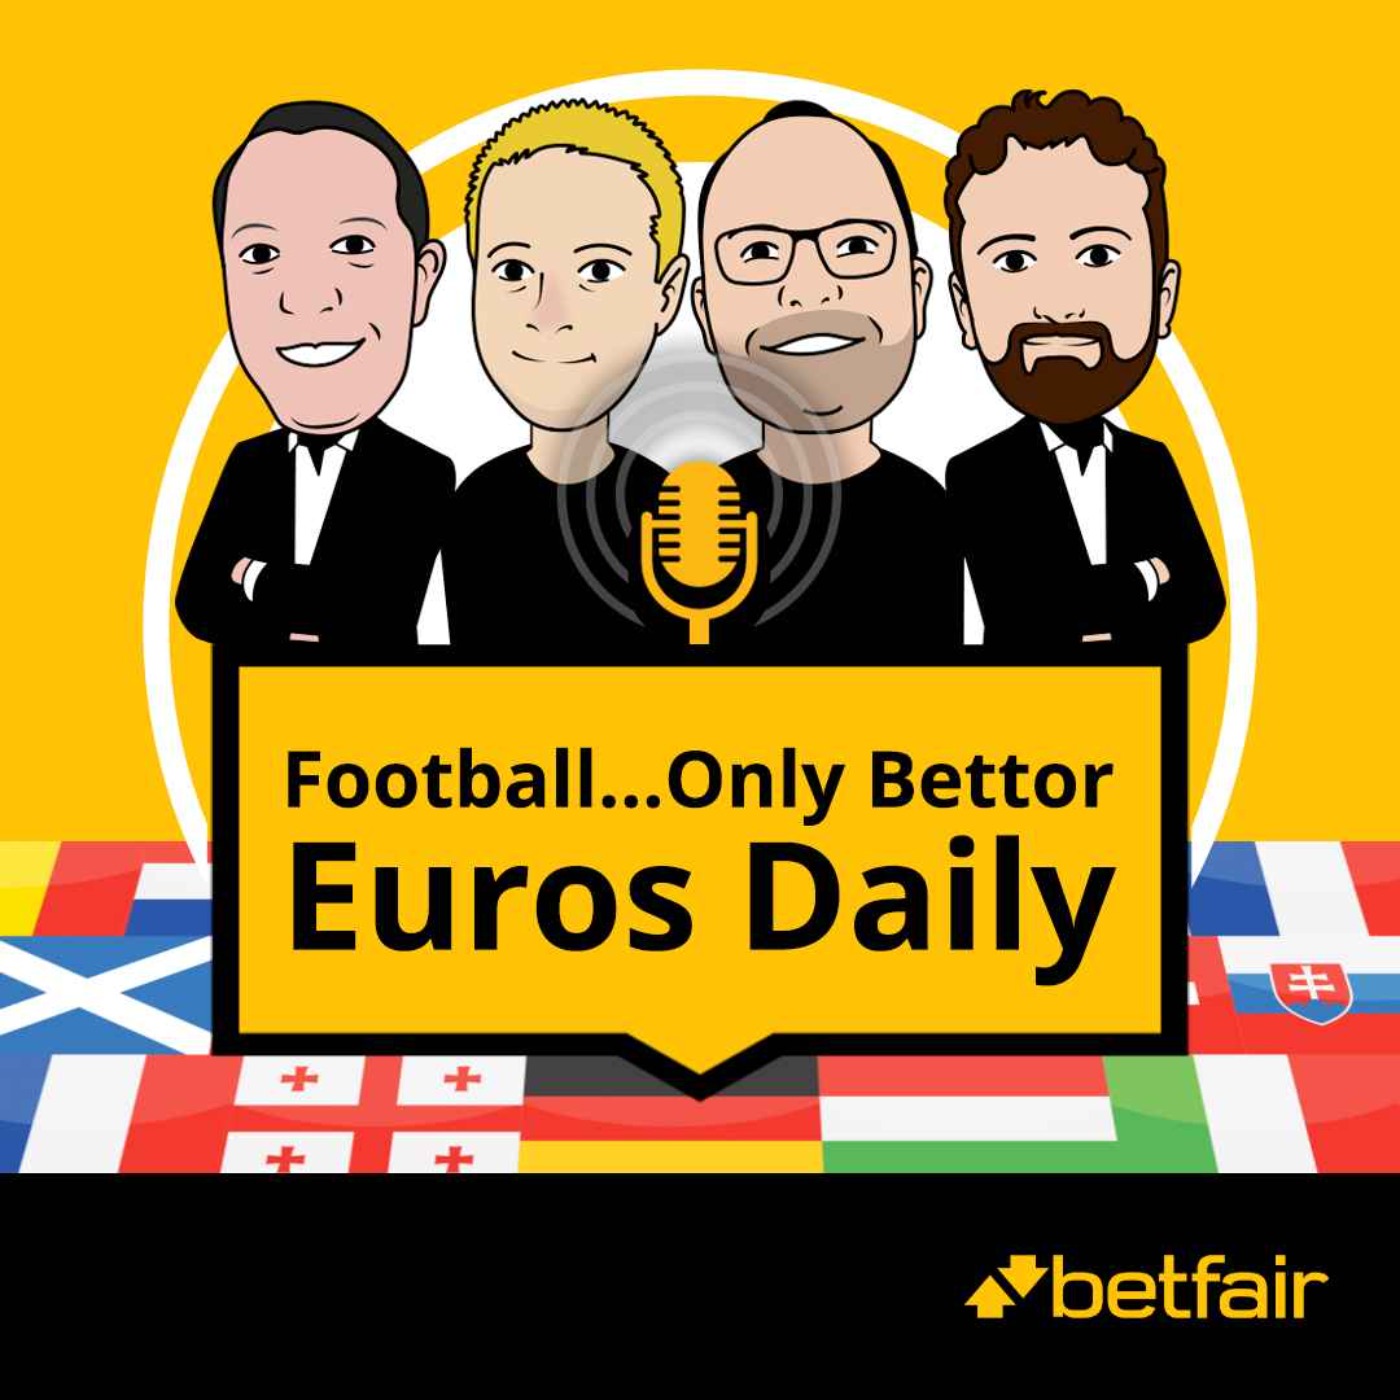 Bellingham boosts lethargic England & Monday tips | Football…Only Bettor: Euros Daily